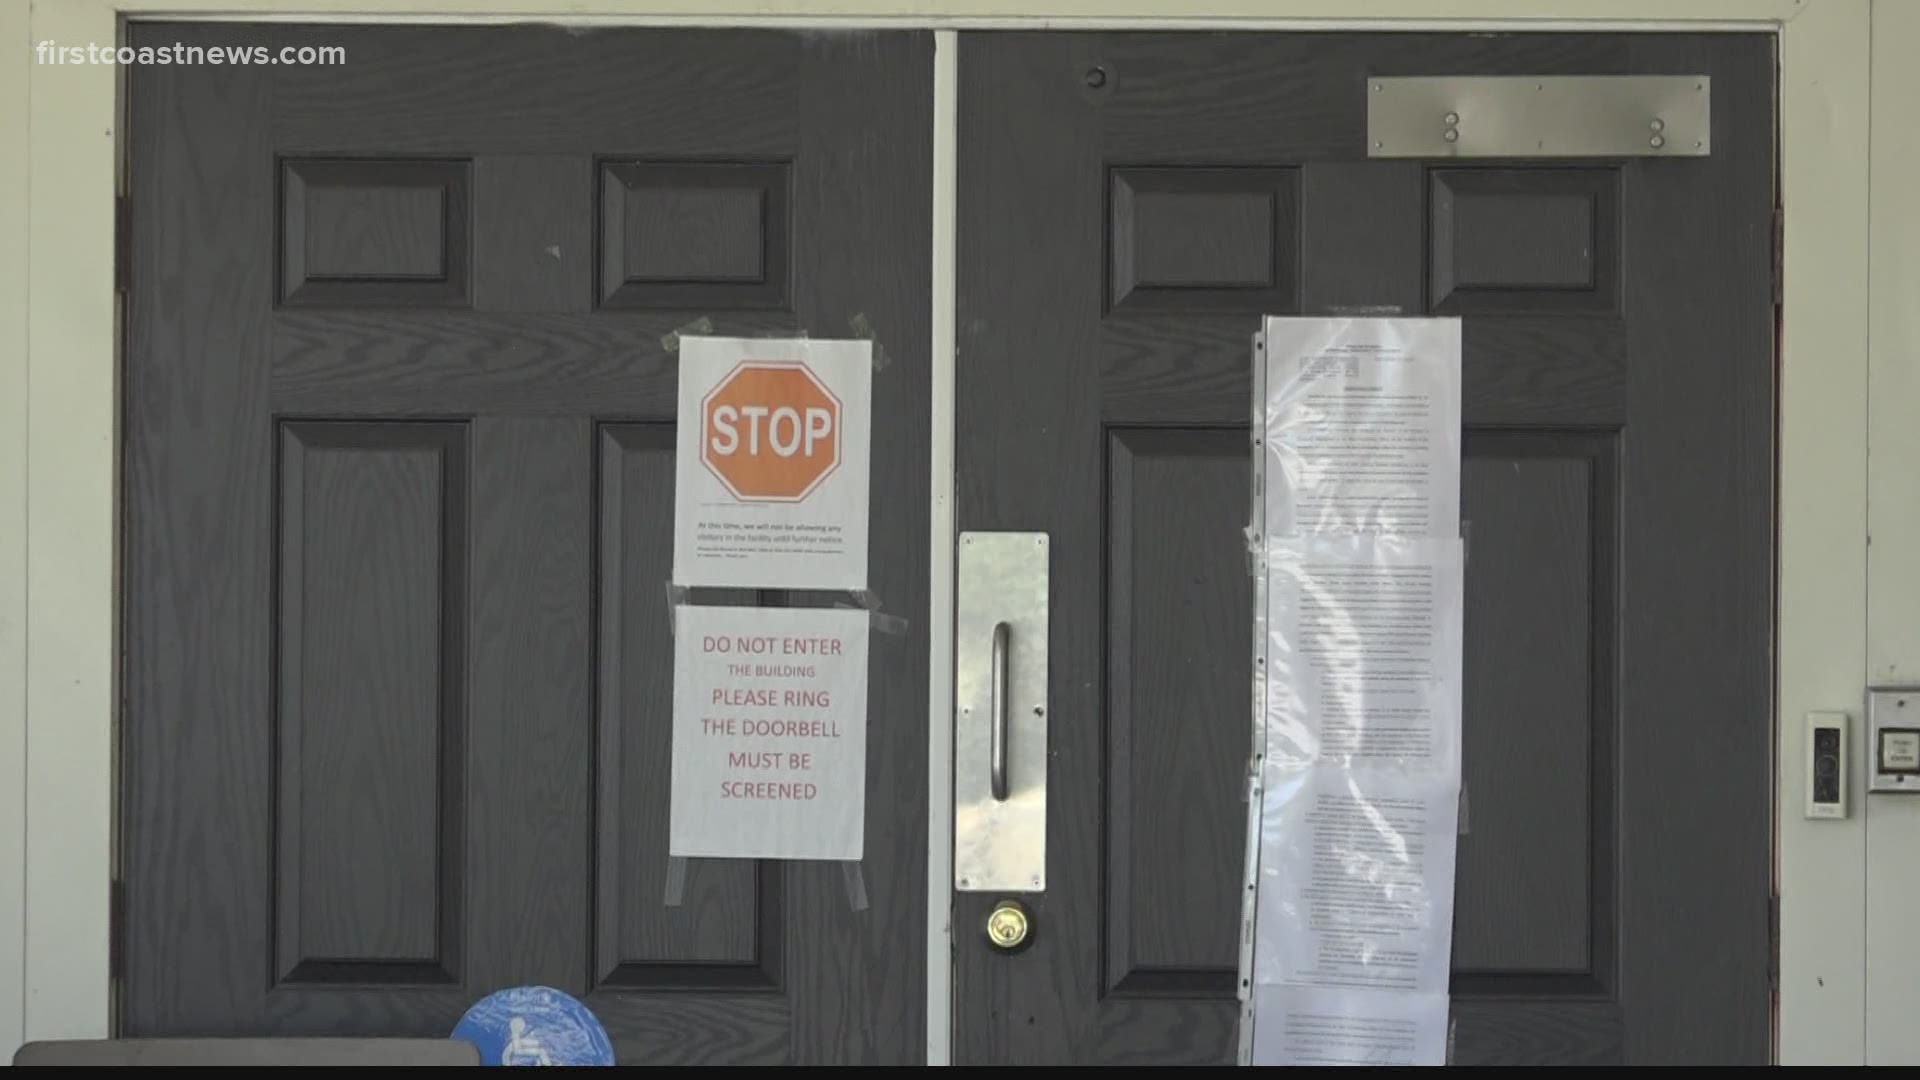 The conversation came after a Jacksonville woman led the charge for changes under pandemic protocol after not being able to see her husband for more than 100 days.